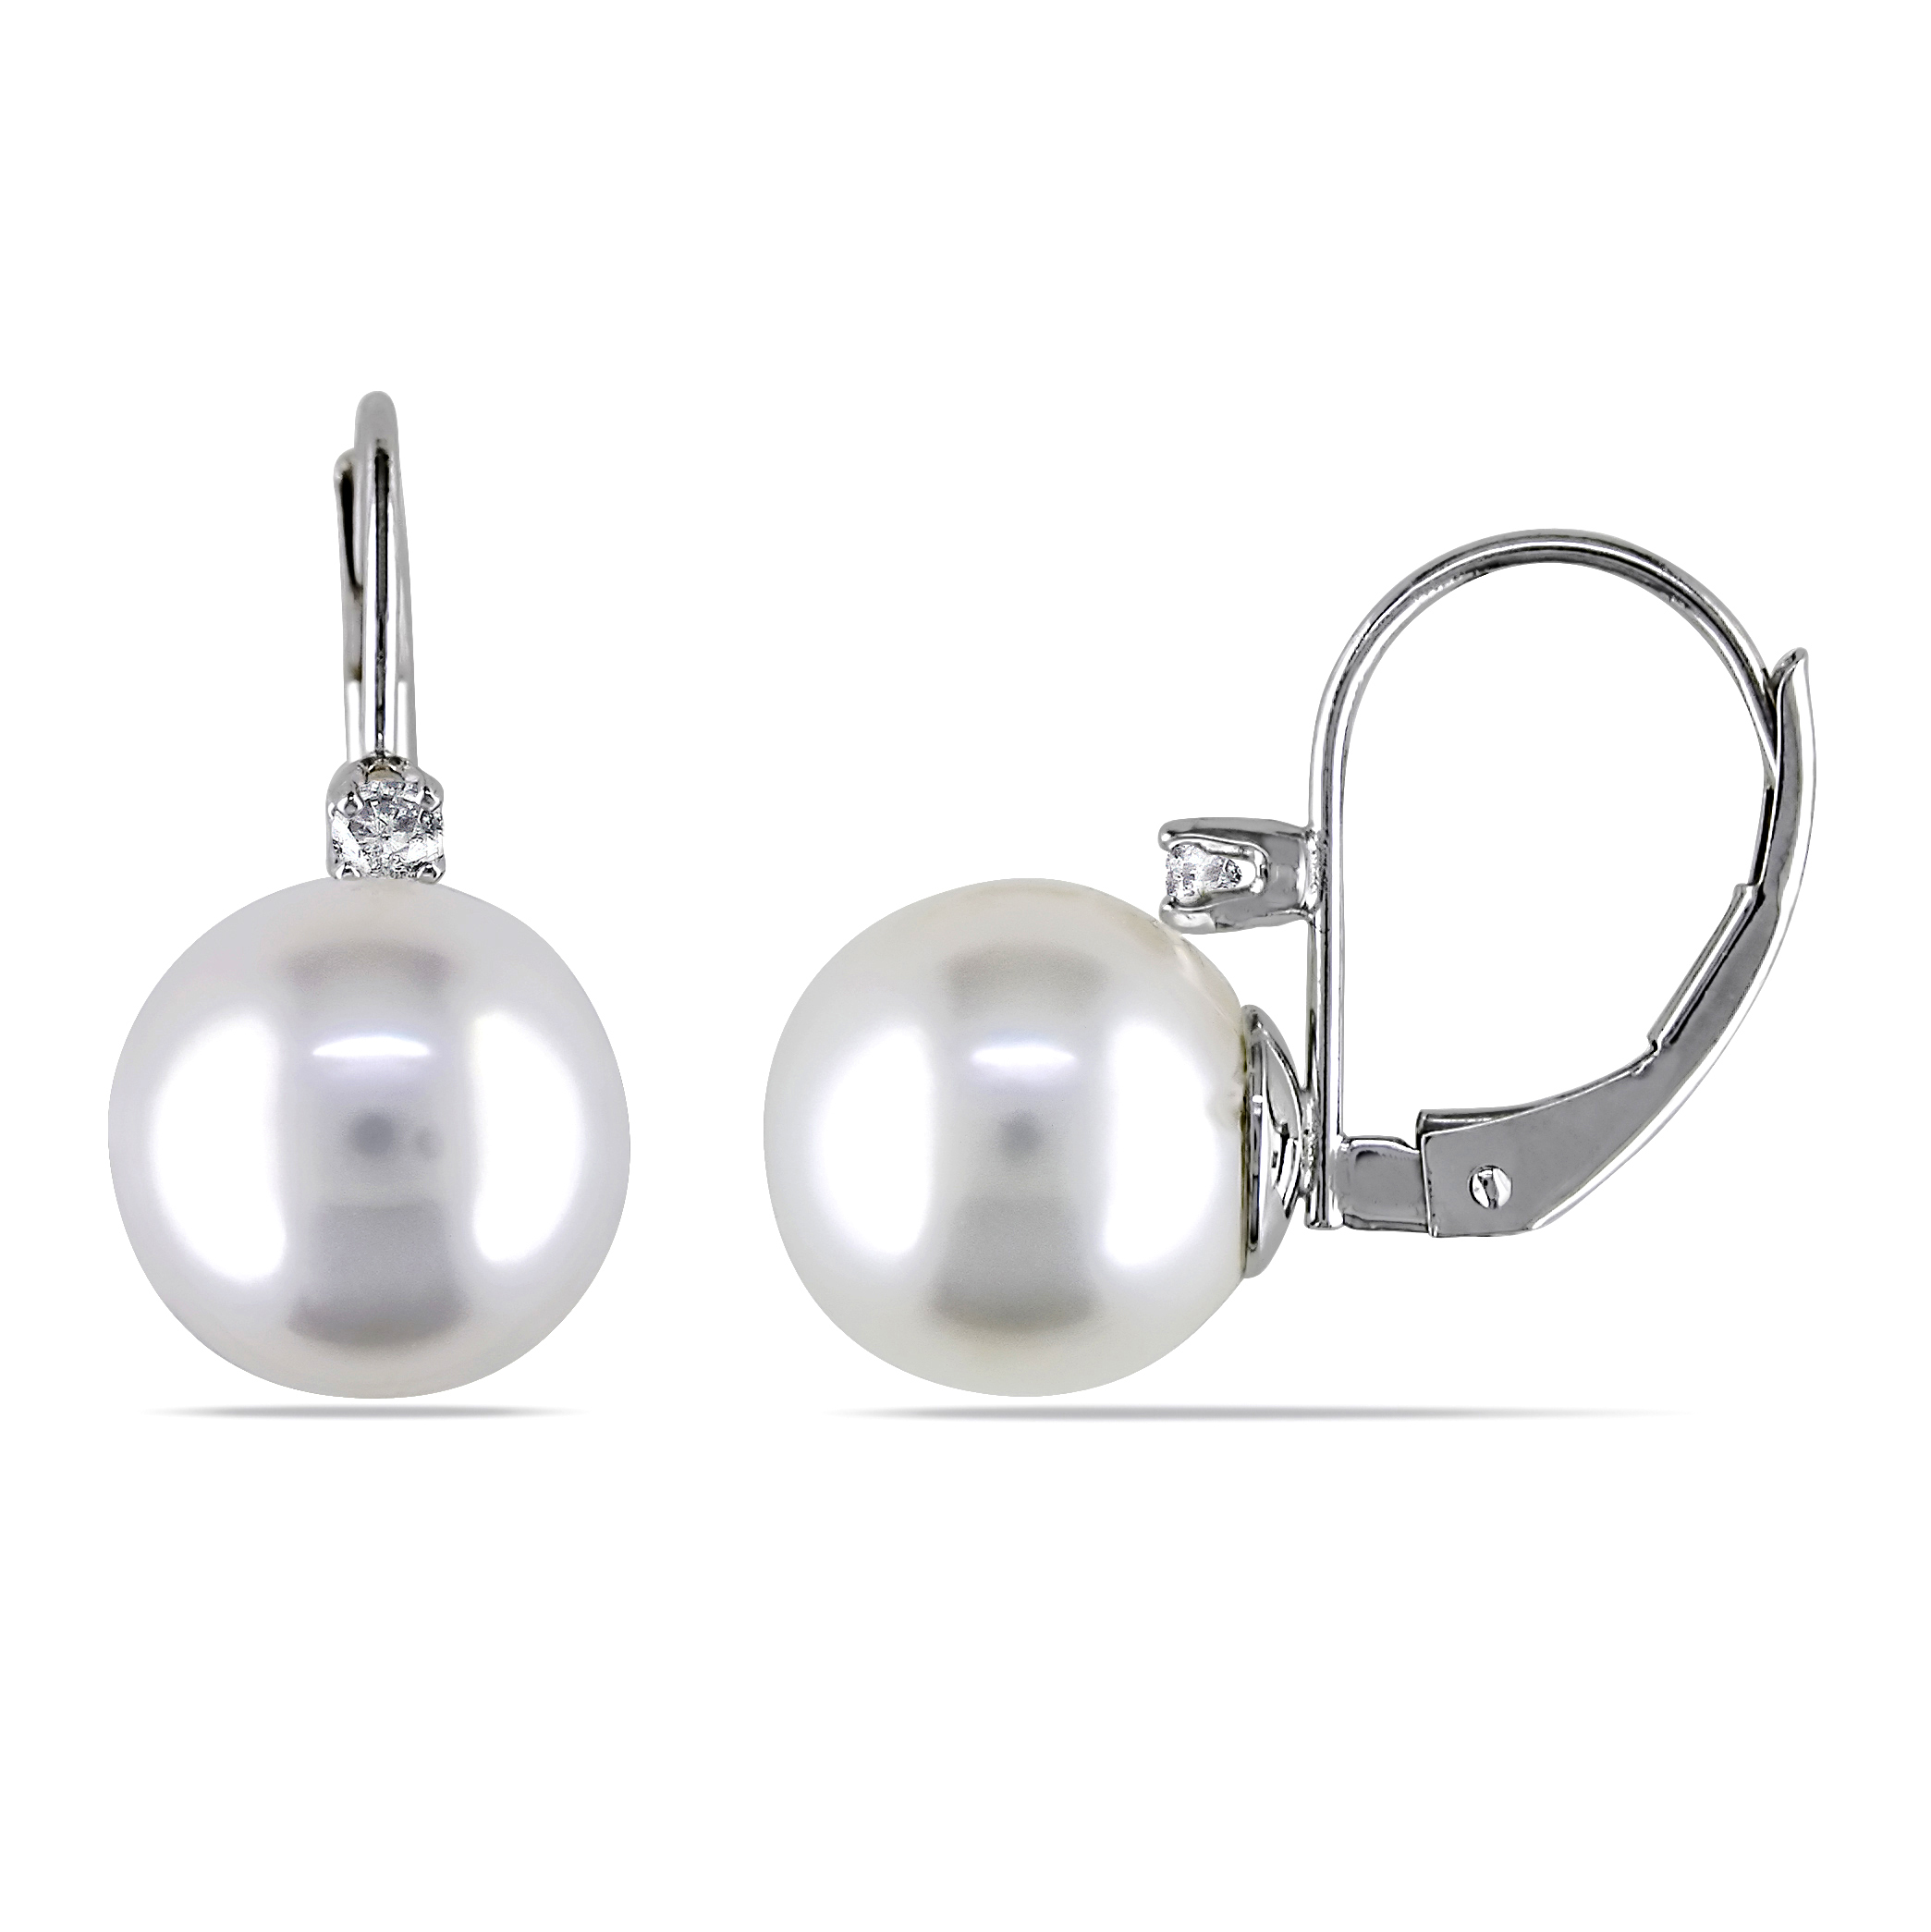 9 - 10 MM South Sea Cultured Pearl and 1/10 CT TW Diamond Leverback Earrings in 14k White Gold